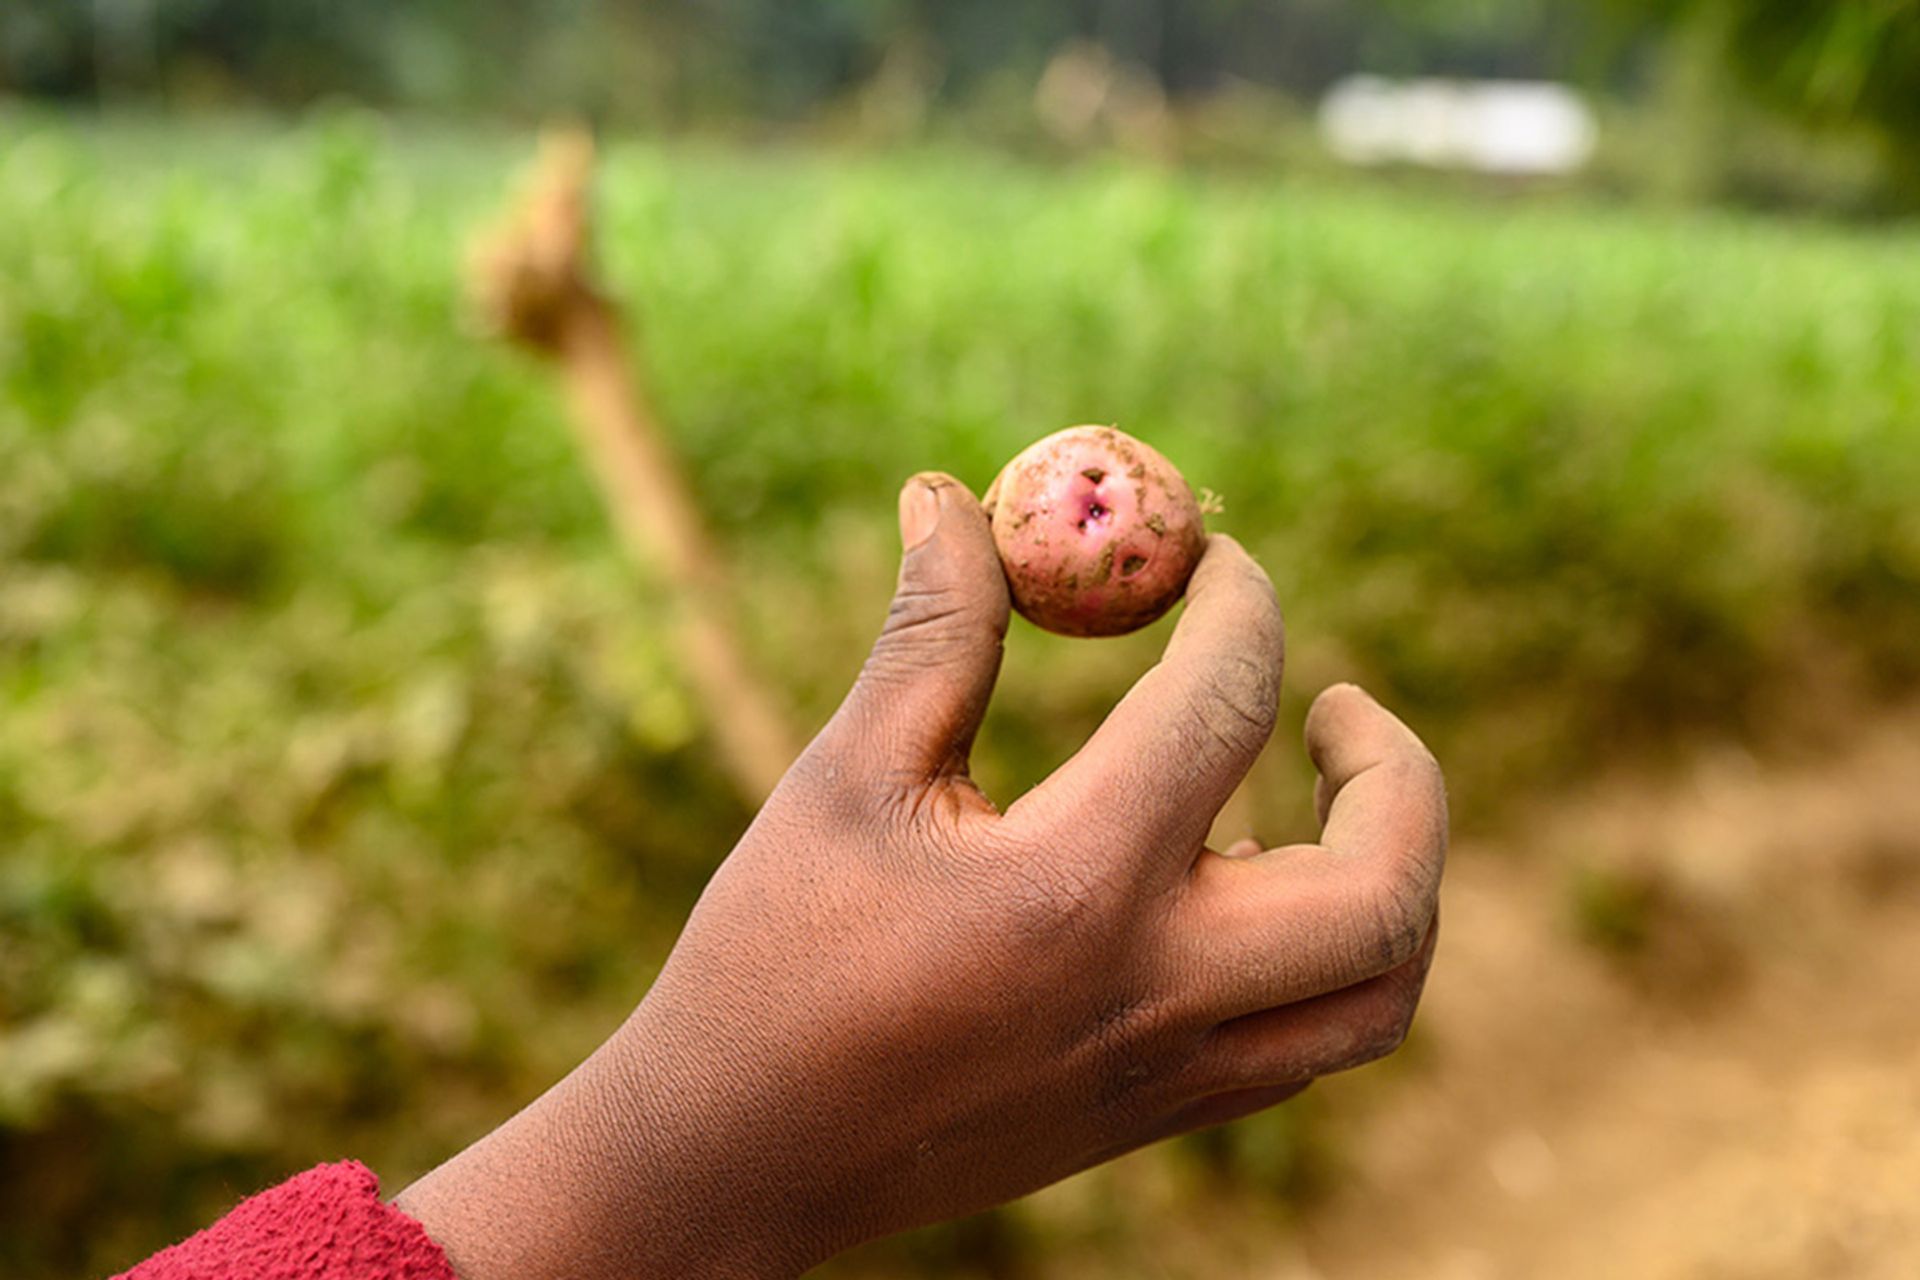 Irish potatoes are one of Rwanda’s key agricultural crops. Small potatoes are used for cultivation, so farmers need not buy seeds.